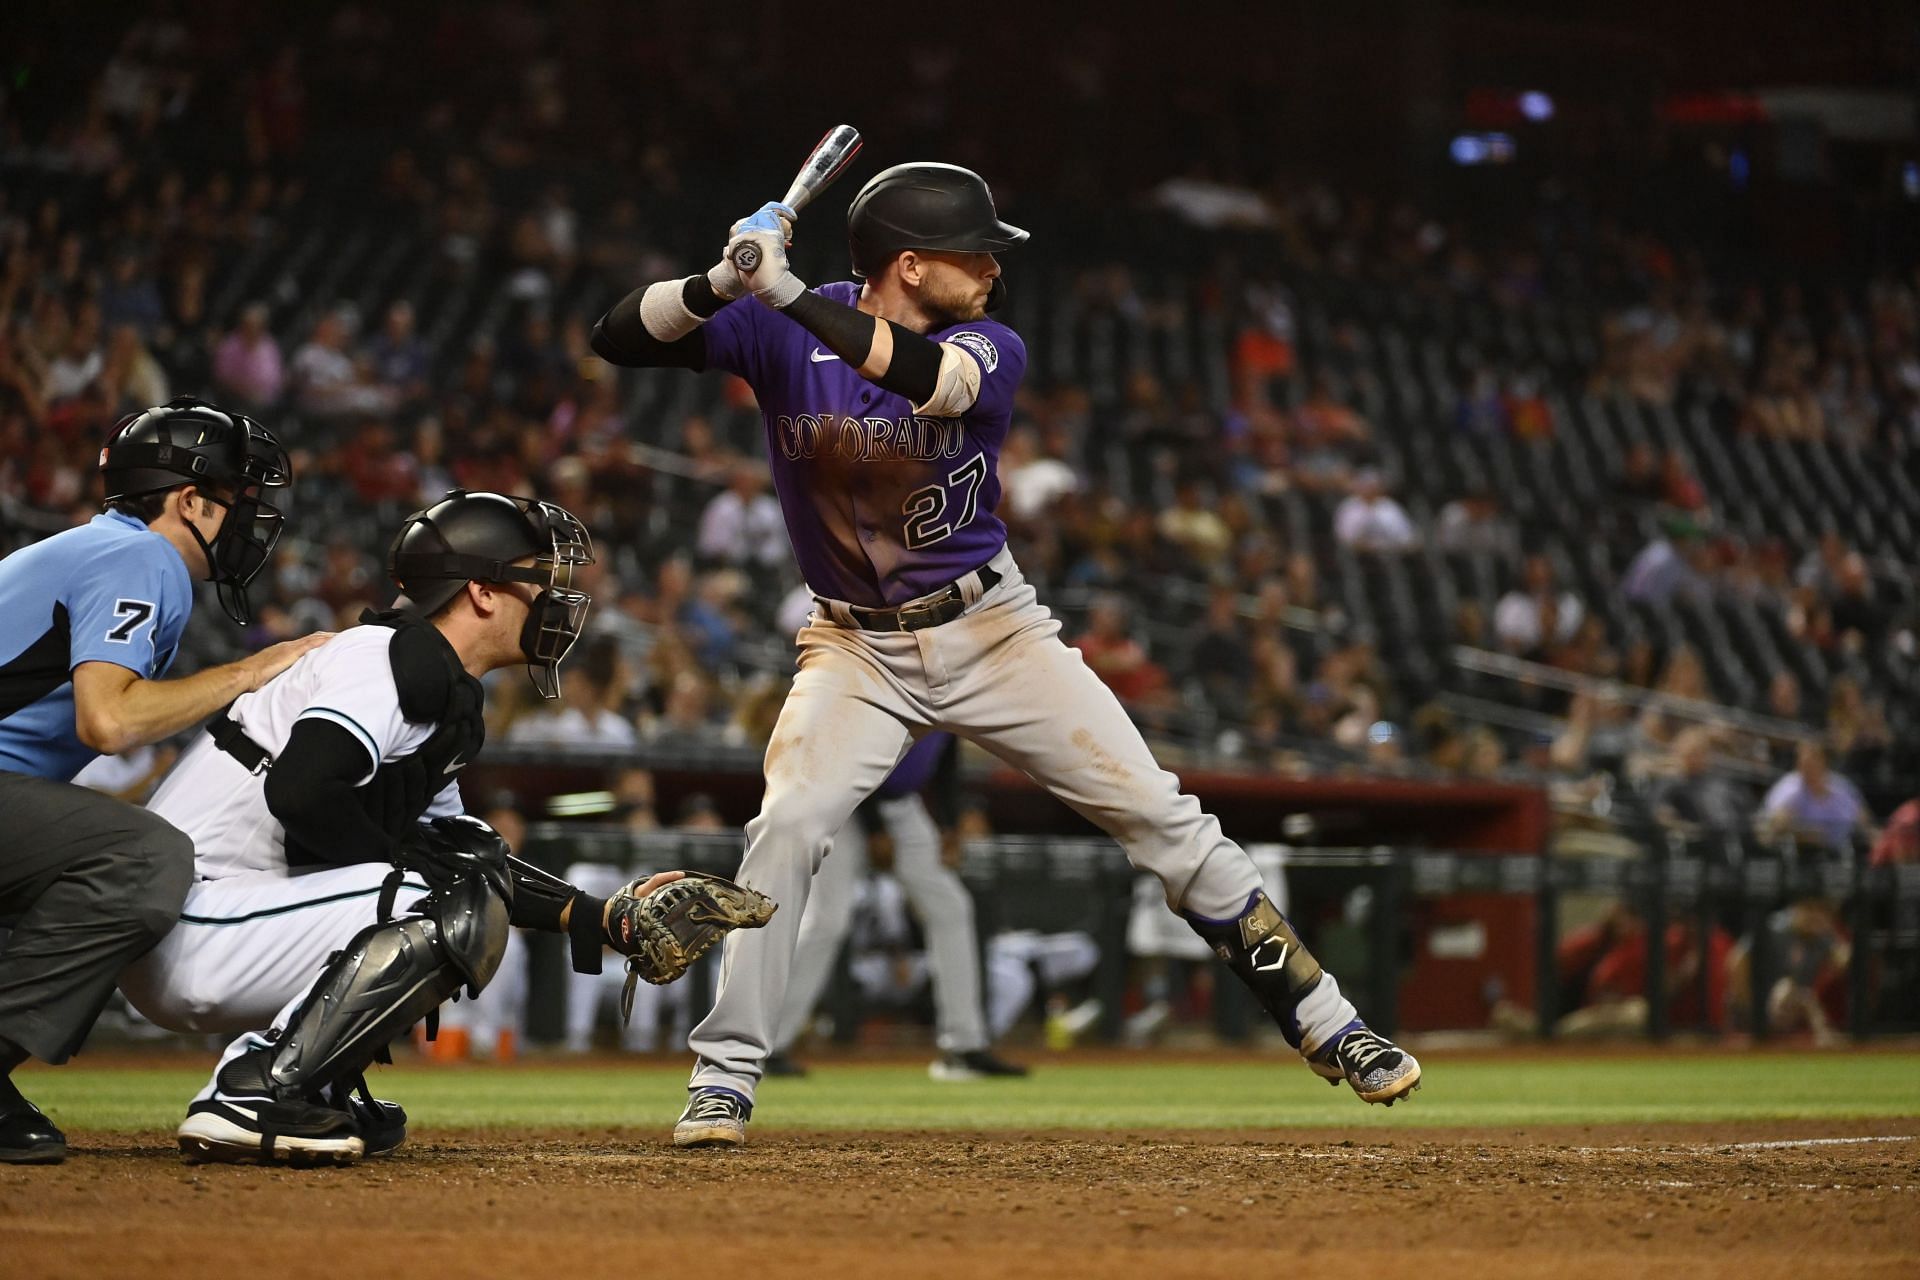 Trevor Story rejected a Qualifying Offer from the Colorado Rockies this off-season